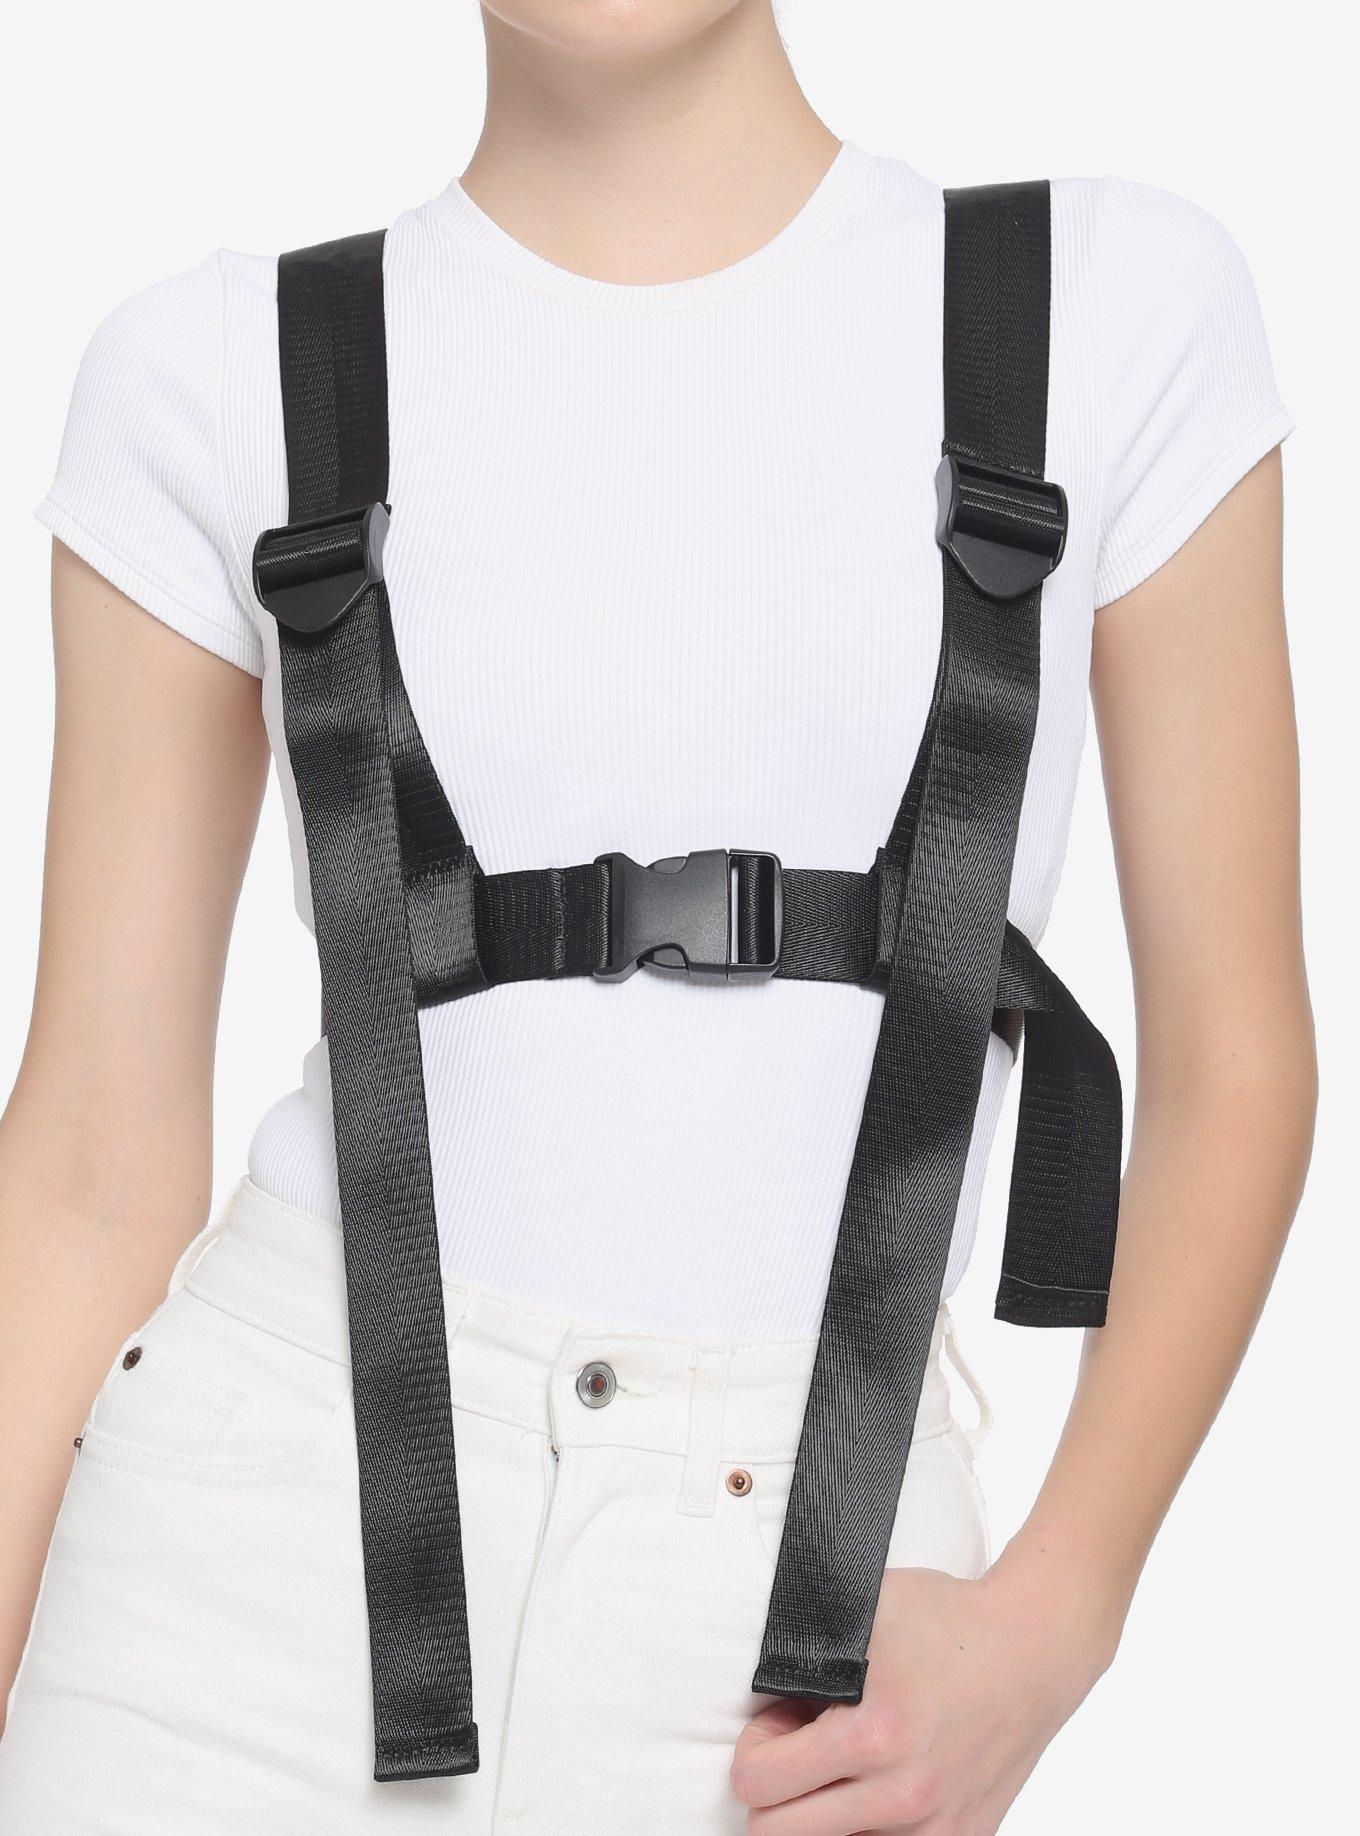 The rise of the 'high fashion harness' in menswear